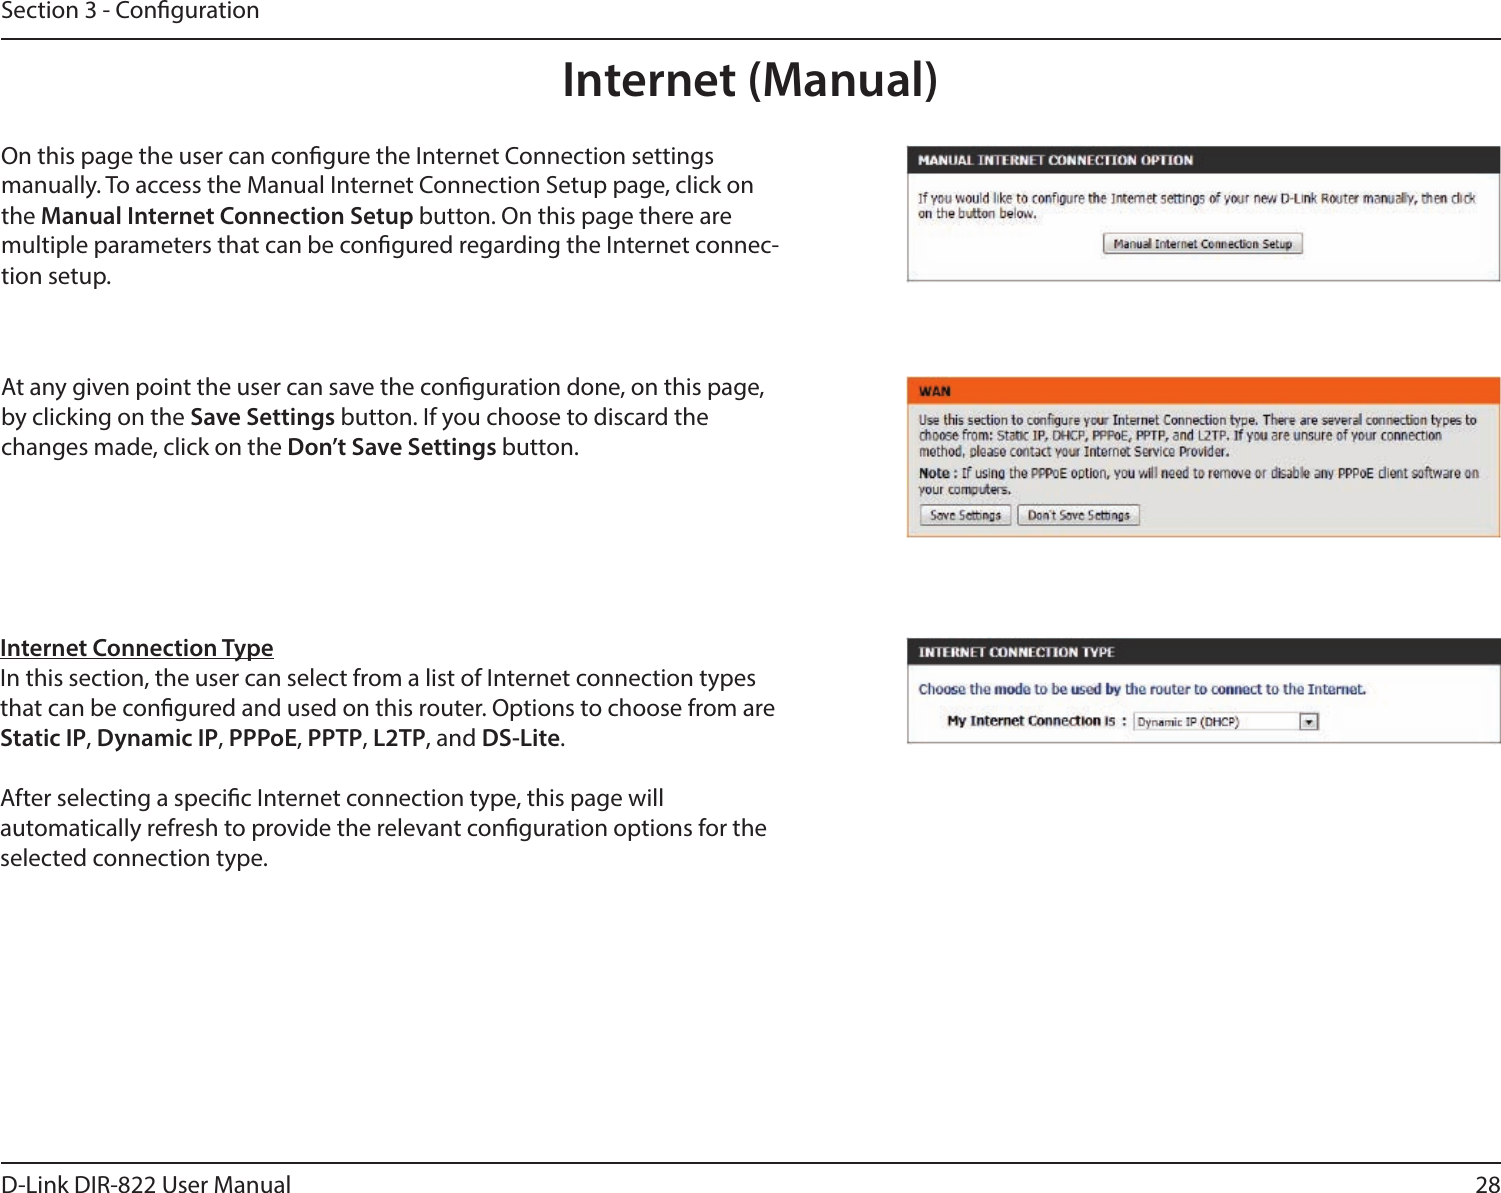 28D-Link DIR-822 User ManualSection 3 - CongurationInternet (Manual)On this page the user can congure the Internet Connection settings  manually. To access the Manual Internet Connection Setup page, click on the Manual Internet Connection Setup button. On this page there are  multiple parameters that can be congured regarding the Internet connec-tion setup.At any given point the user can save the conguration done, on this page, by clicking on the Save Settings button. If you choose to discard the  changes made, click on the Don’t Save Settings button.Internet Connection TypeIn this section, the user can select from a list of Internet connection types that can be congured and used on this router. Options to choose from are Static IP, Dynamic IP, PPPoE, PPTP, L2TP, and DS-Lite.After selecting a specic Internet connection type, this page will  automatically refresh to provide the relevant conguration options for the selected connection type.